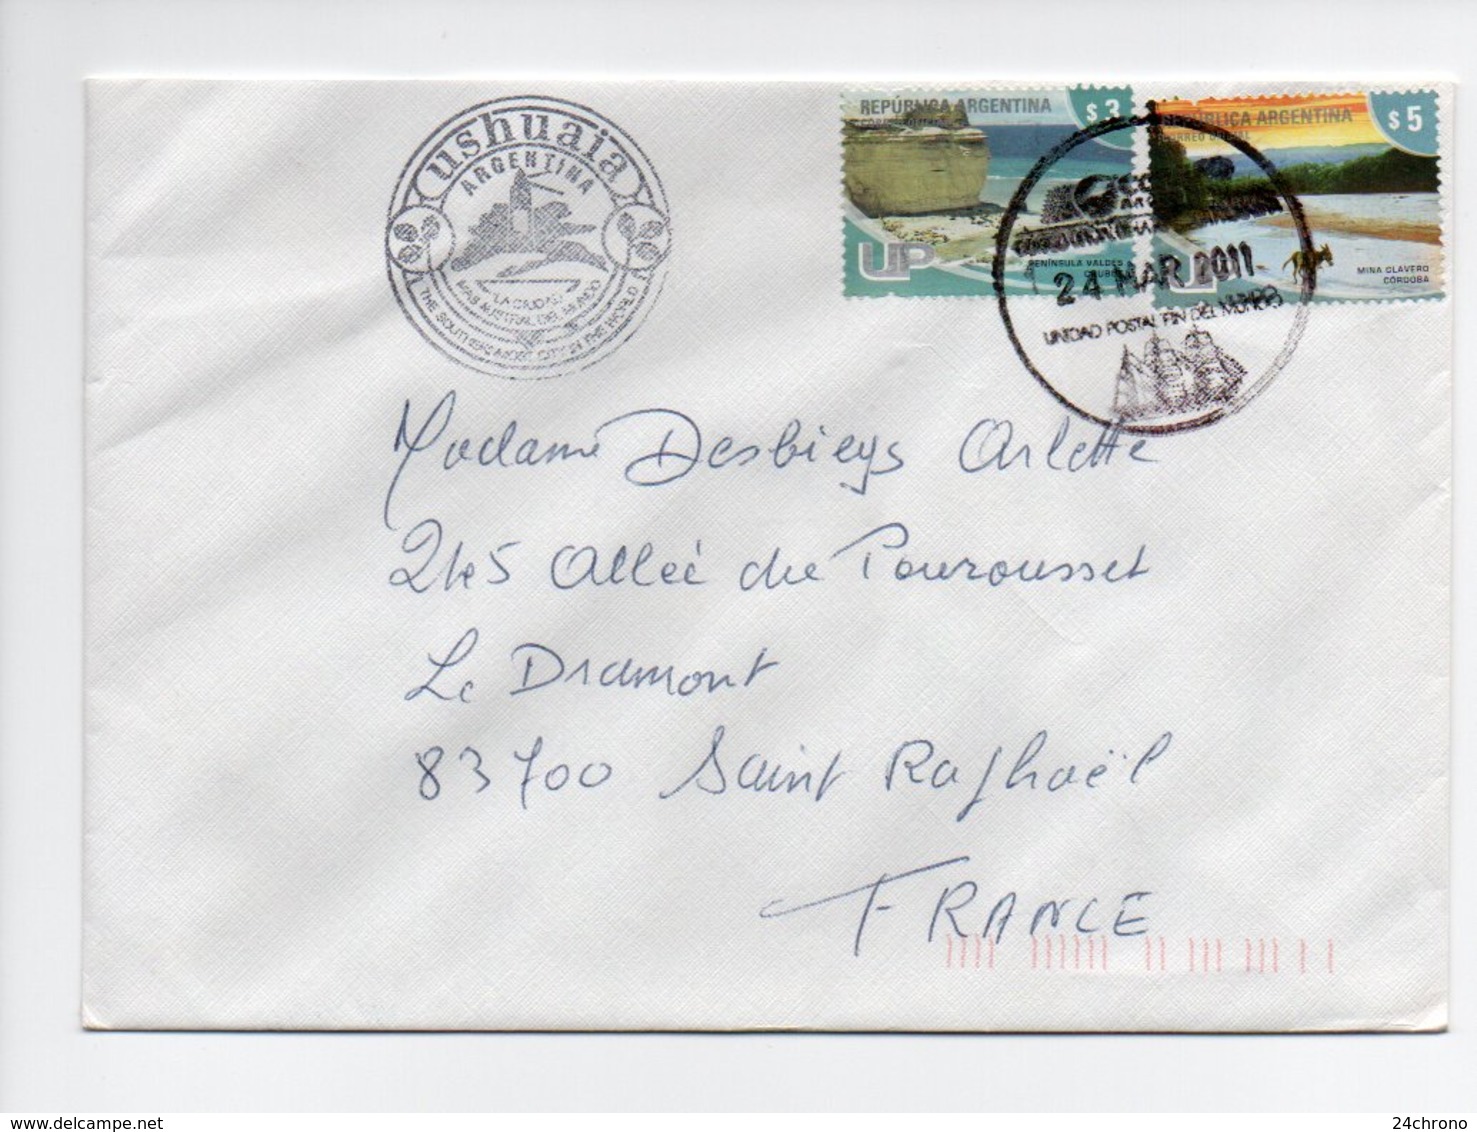 Argentine: Enveloppe Avec Timbres, Ushuaia 2011, Phare (18-2808) - Covers & Documents